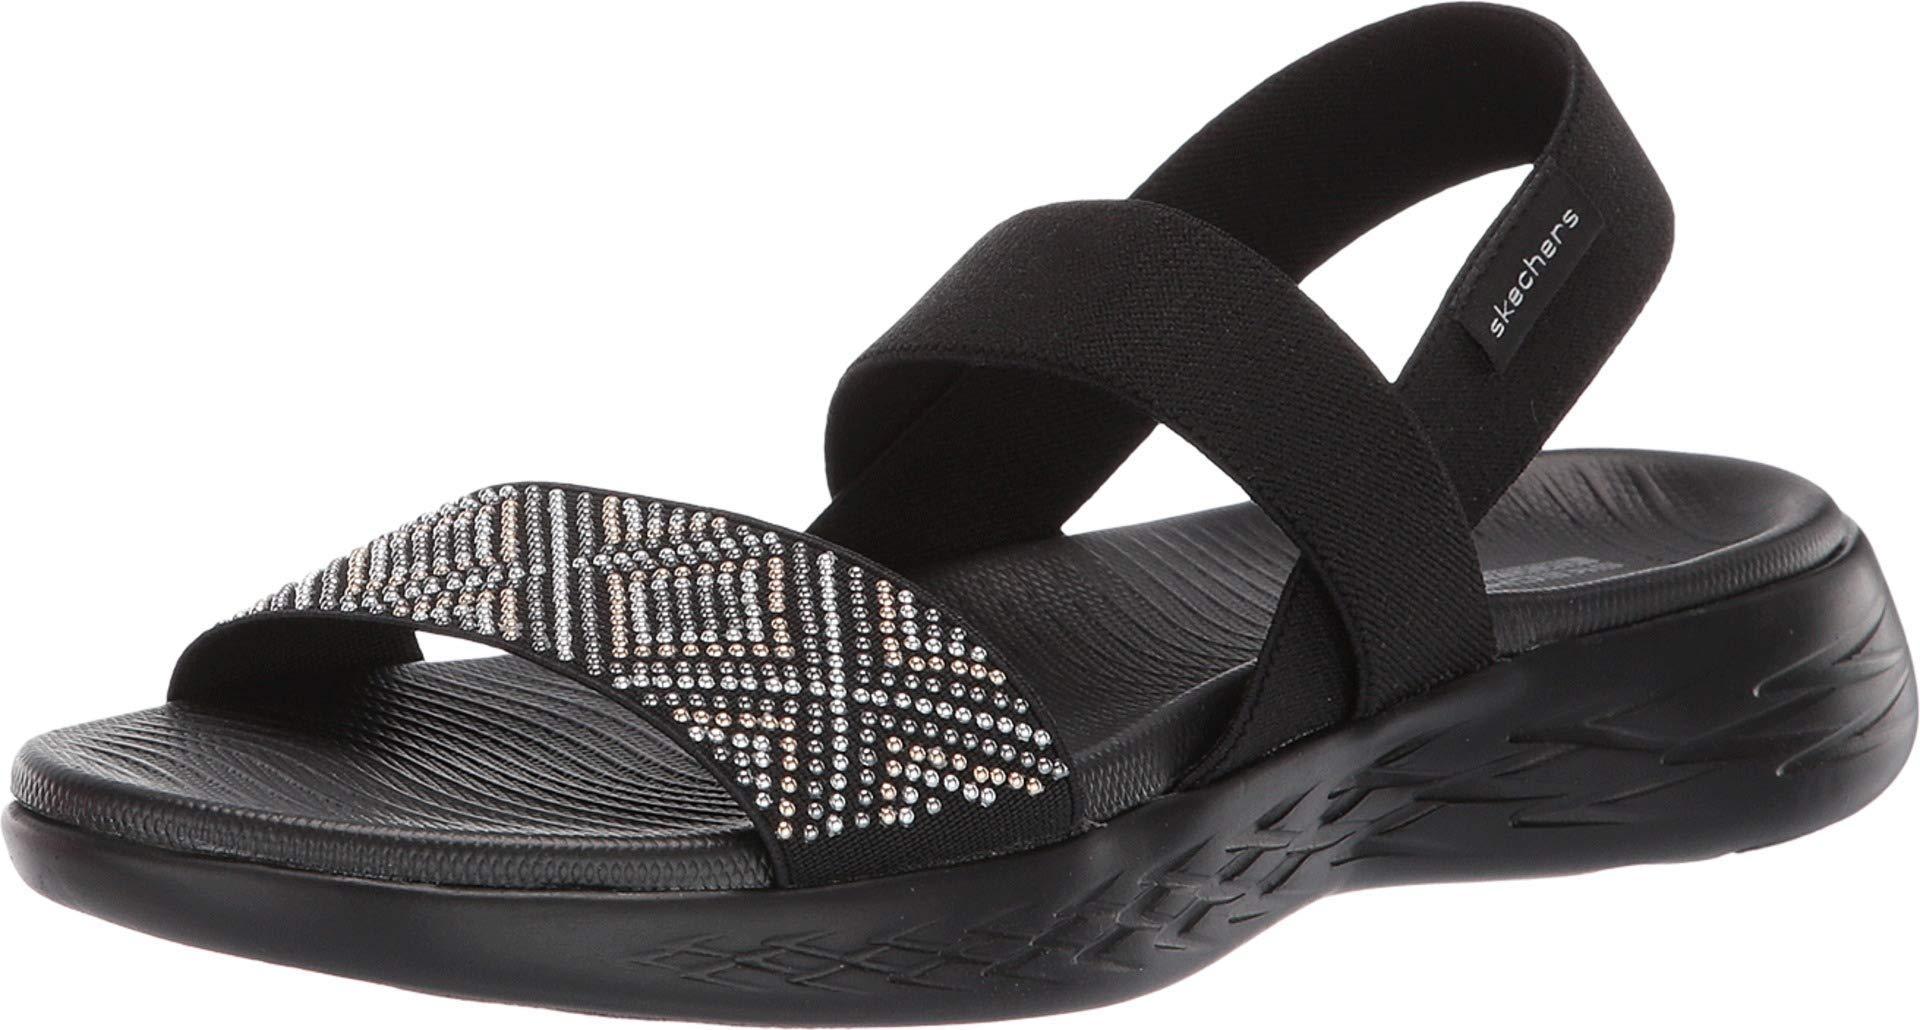 Skechers On-the-go 600-glitzy Flat Sandal in Black - Save 37% - Lyst